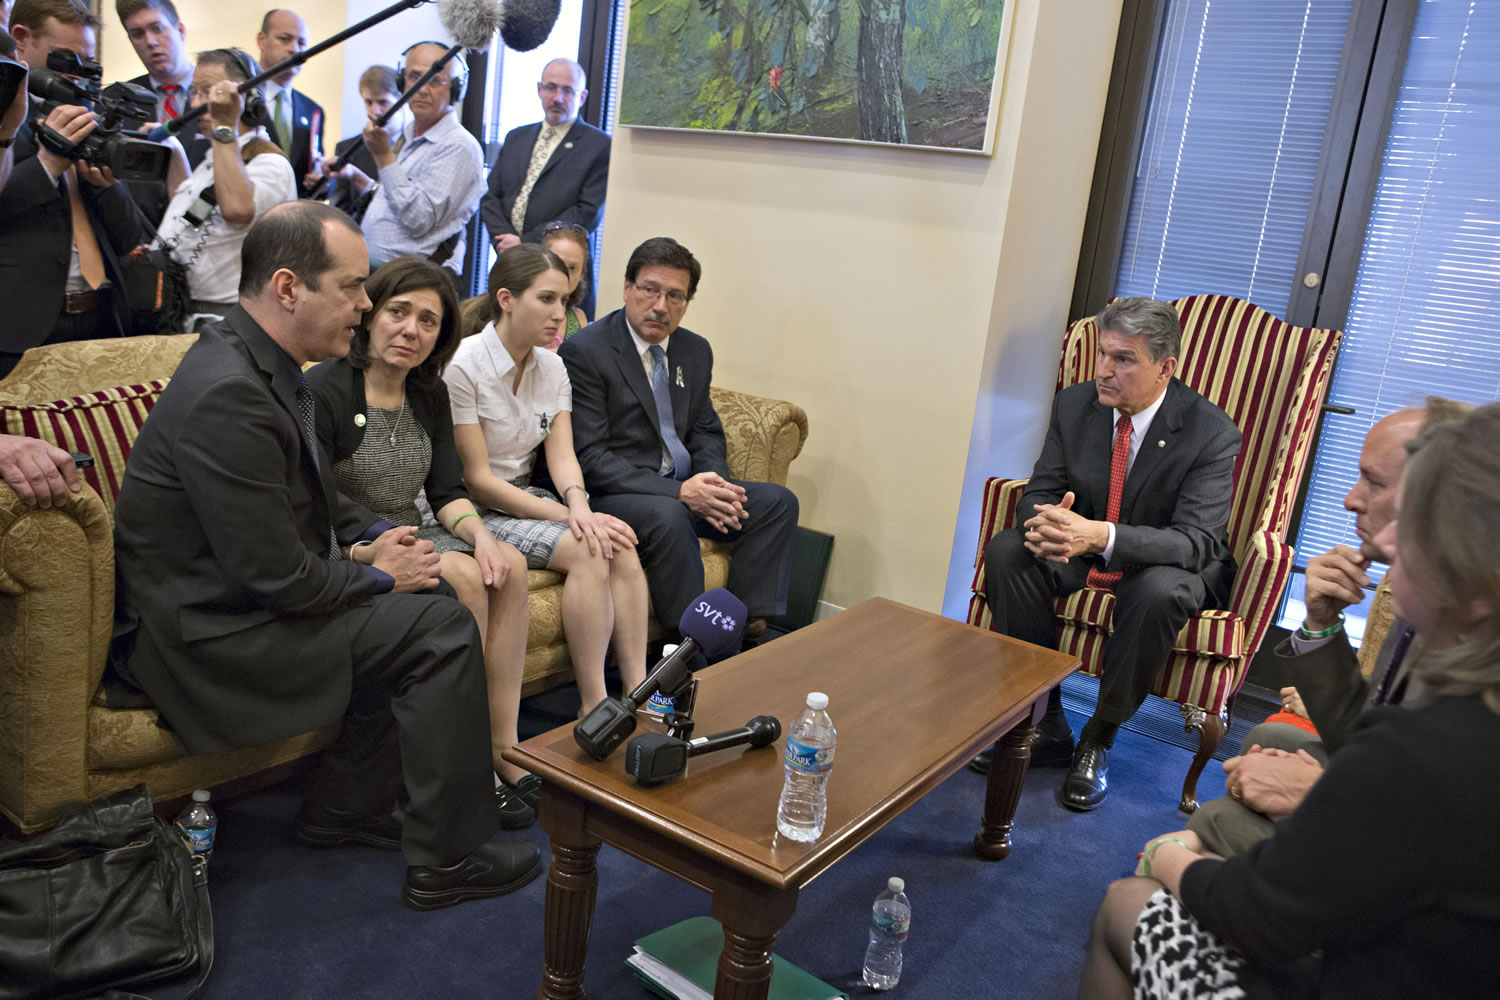 Sen. Joe Manchin, D-W.Va., seated right, meets in his office with families of victims of the  Sandy Hook Elementary School shooting in Newtown, Conn., on the day he announced that they have reached a bipartisan deal on expanding background checks to more gun buyers on Capitol Hill in Washington on Wednesday. Seated on sofa from left are David and Francine Wheeler, who lost their 6-year-old son Ben in the shooting, Katy Sherlach and her father Bill Sherlach, whose wife Mary Sherlach was killed.